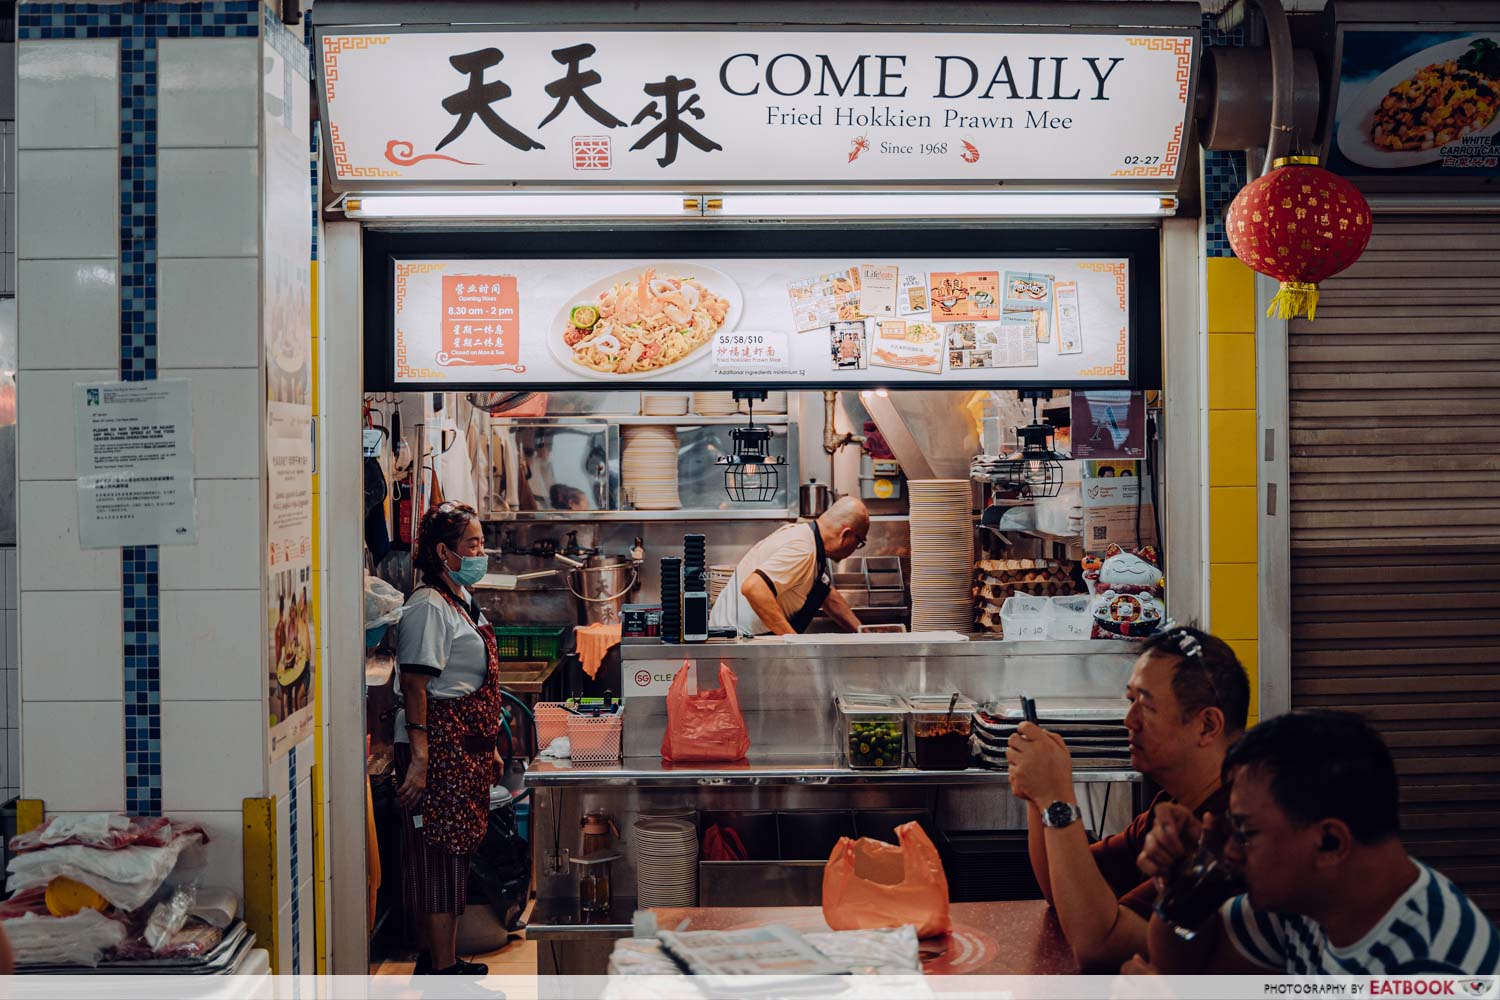 come daily fried hokkien prawn mee - storefront